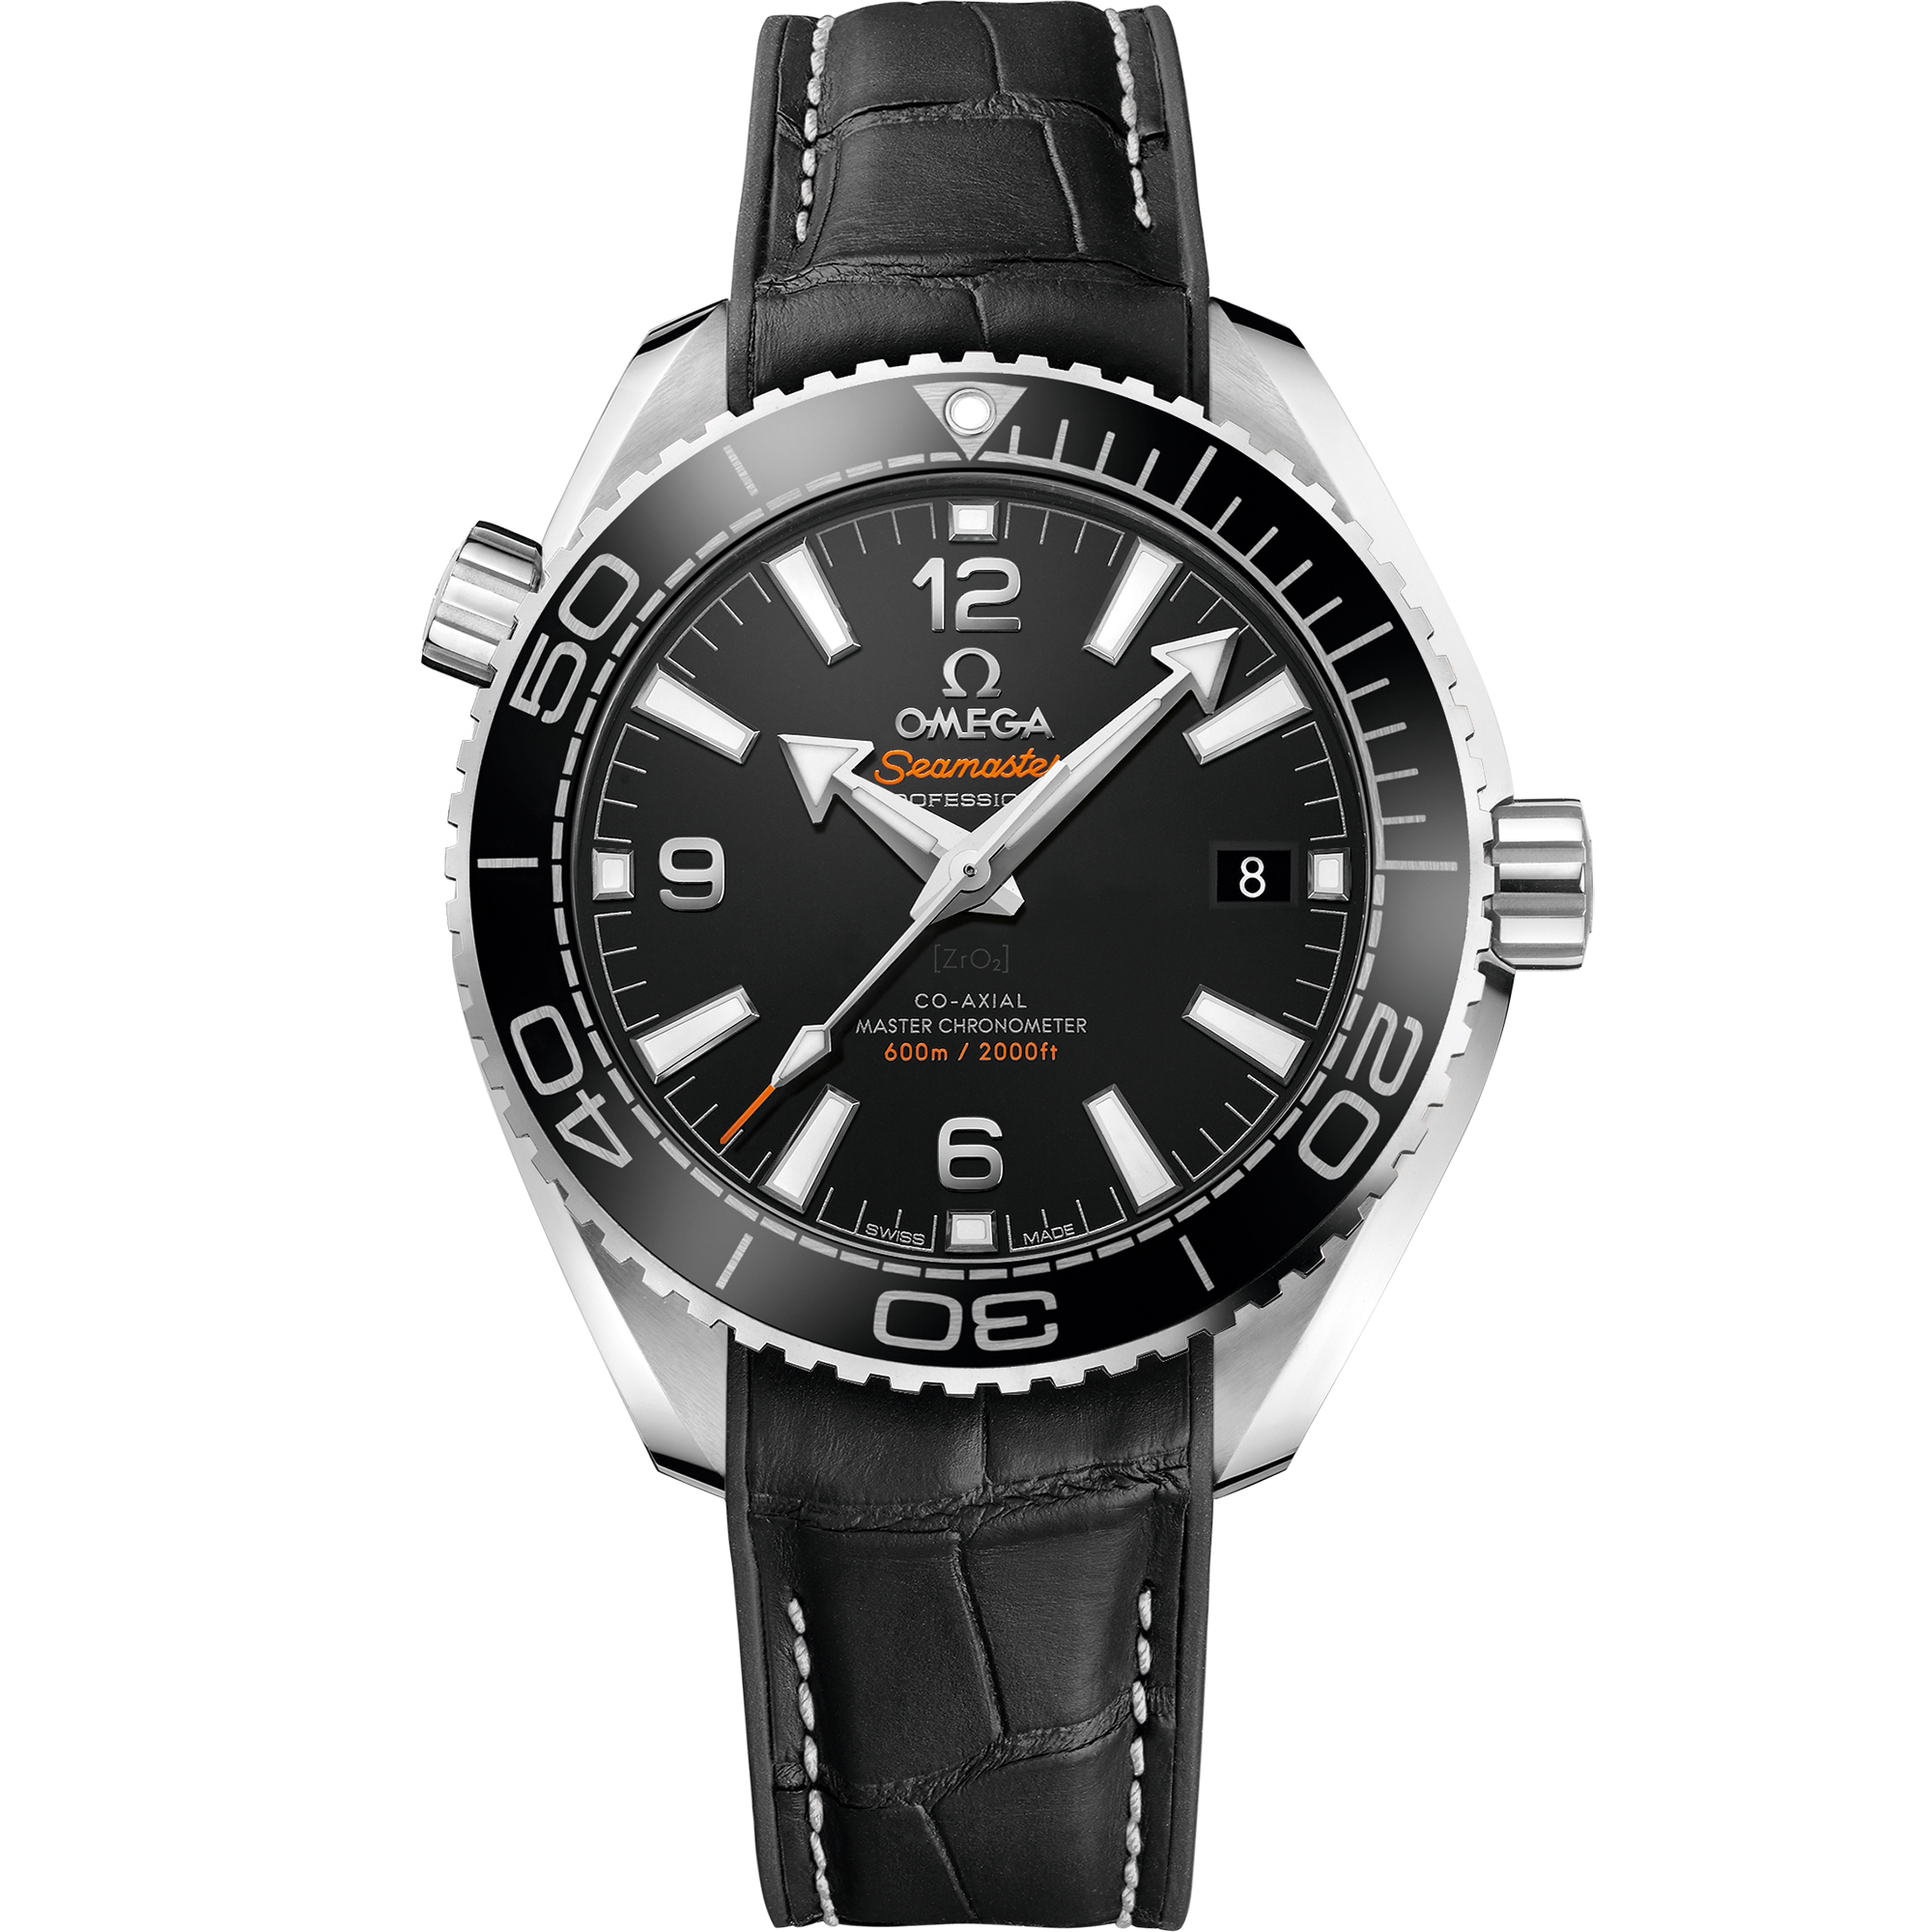 Omega Seamaster Planet Ocean 600M 39.5 mm steel on leather strap with rubber lining